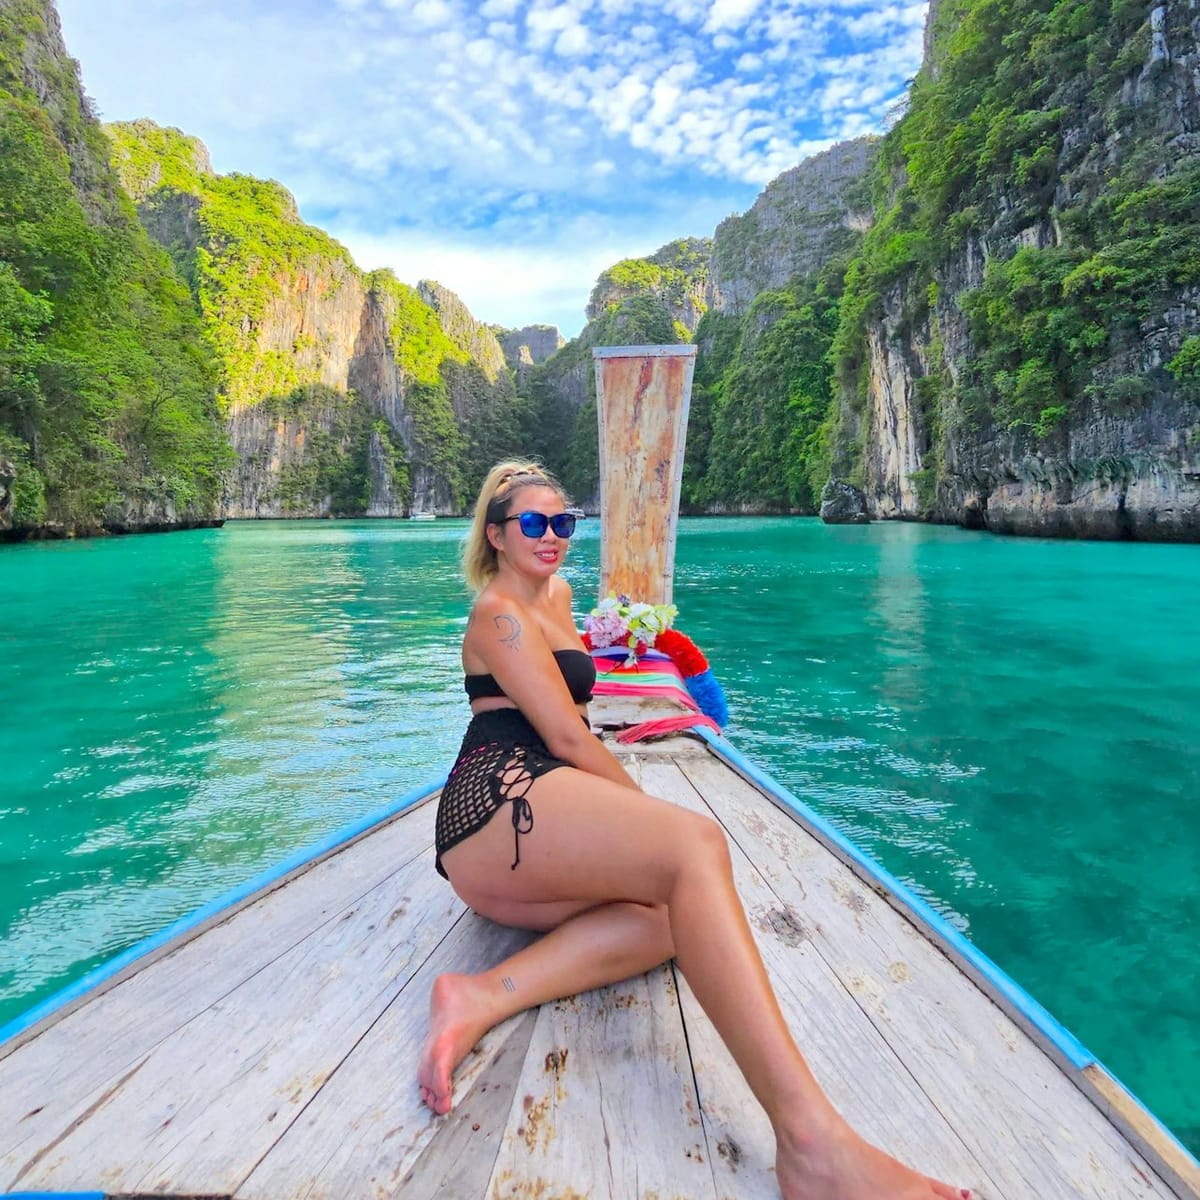 phi-phi-islands-private-longtail-boat-tour-with-maya-bay-snorkeling_1